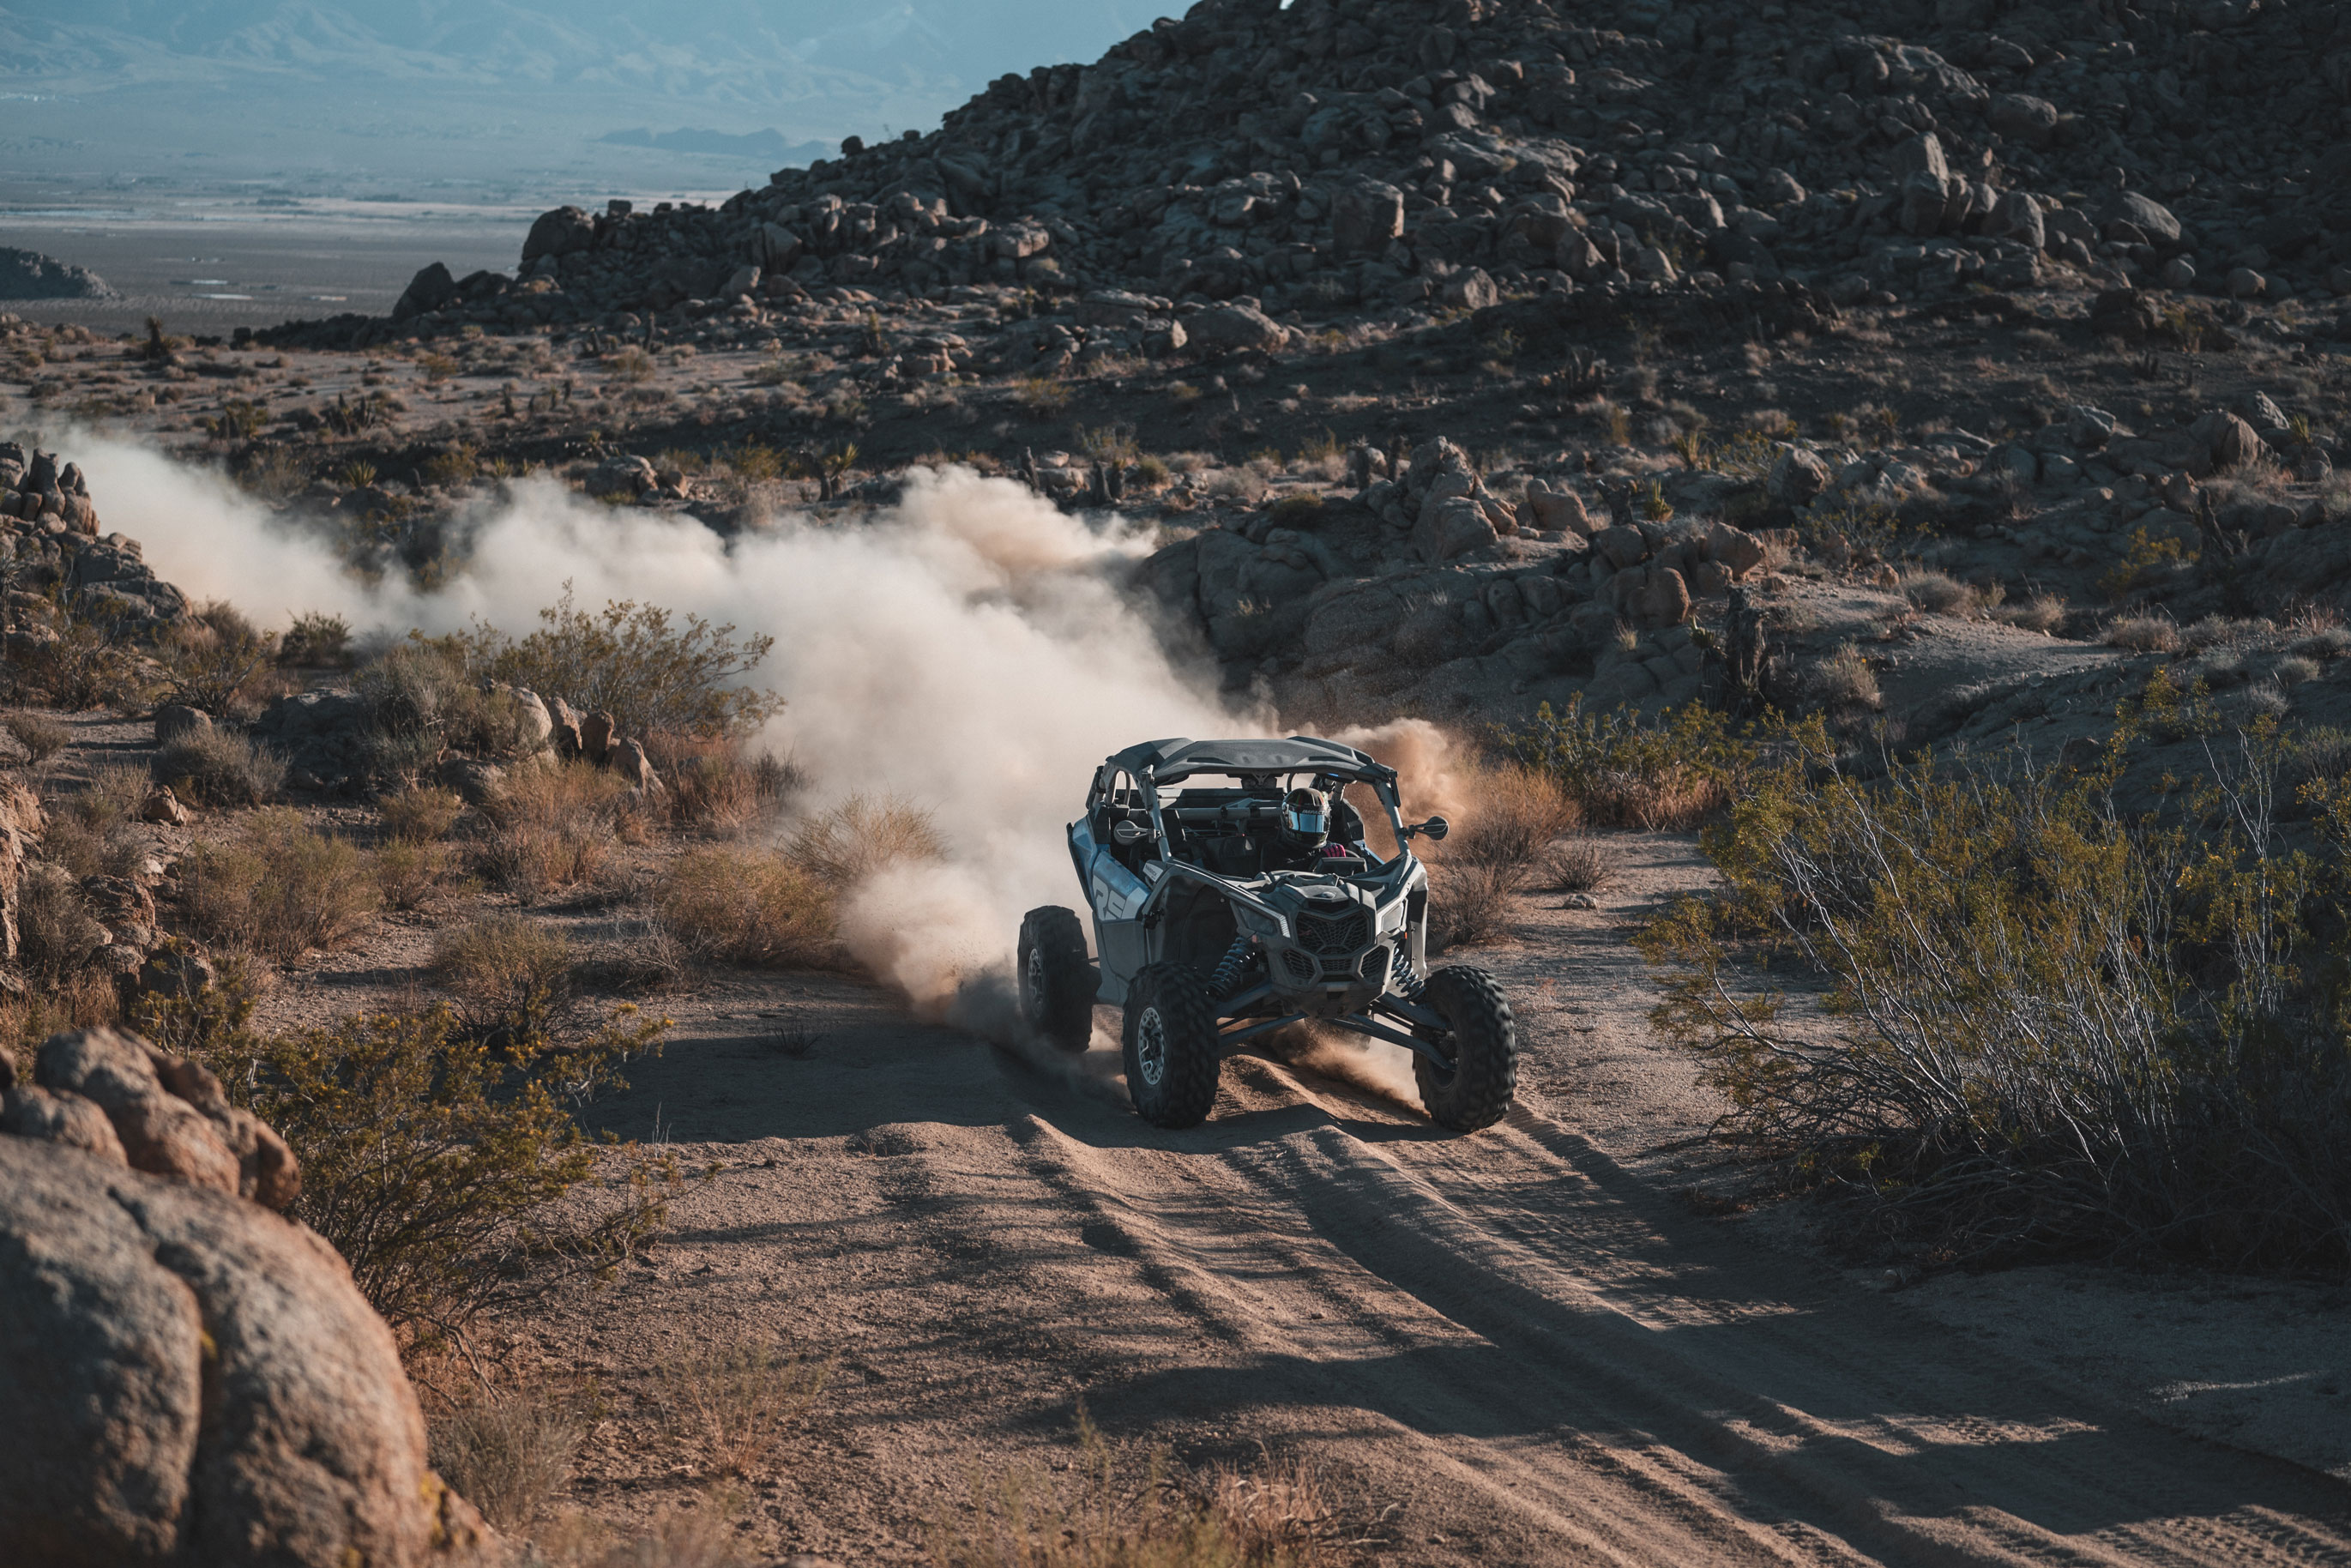 Can-Am Maverick X3 in action on sand trail